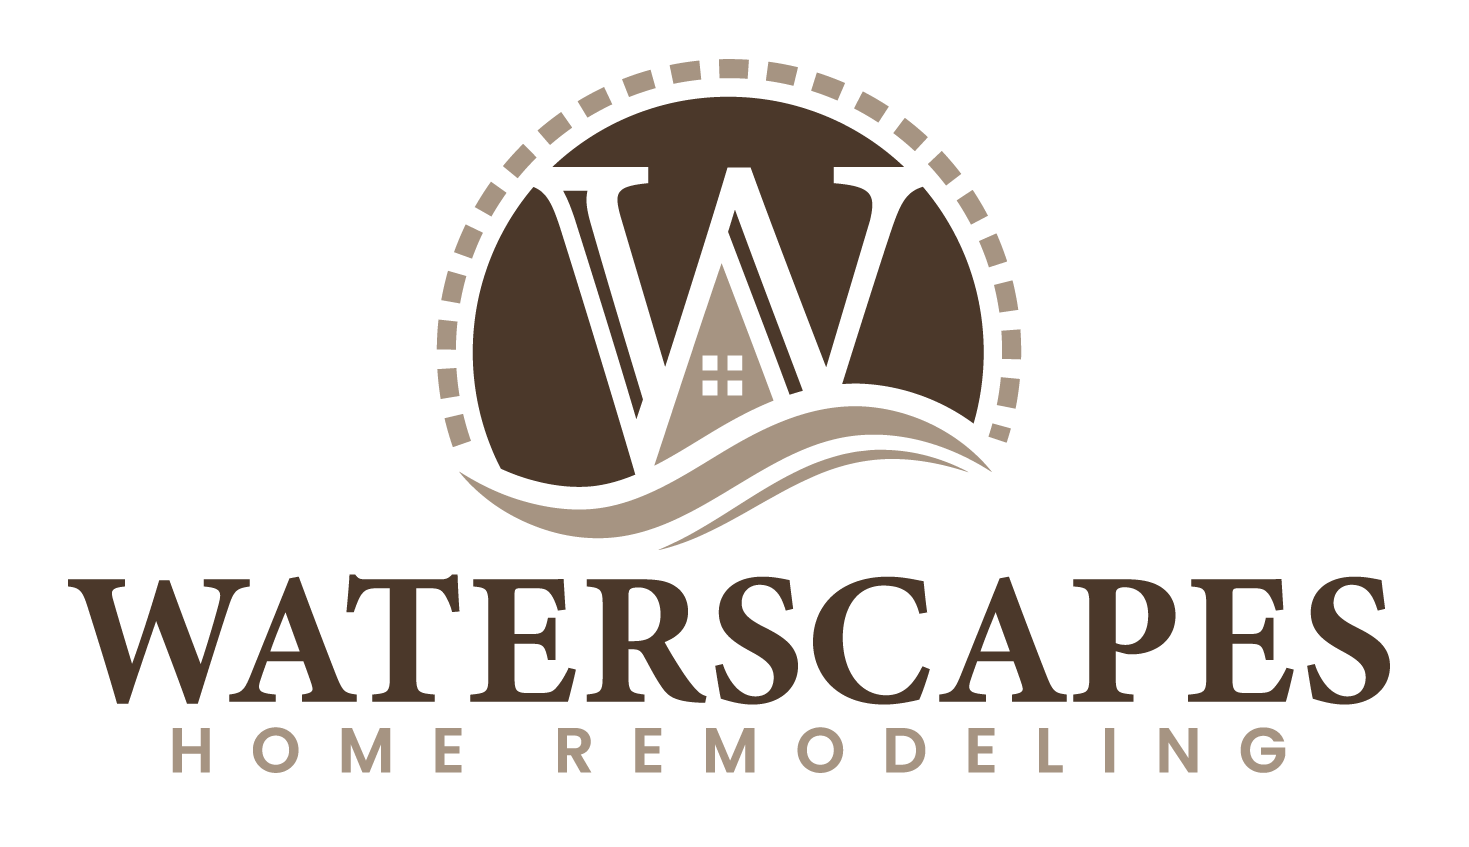 Waterscapes Home Remodeling Logo